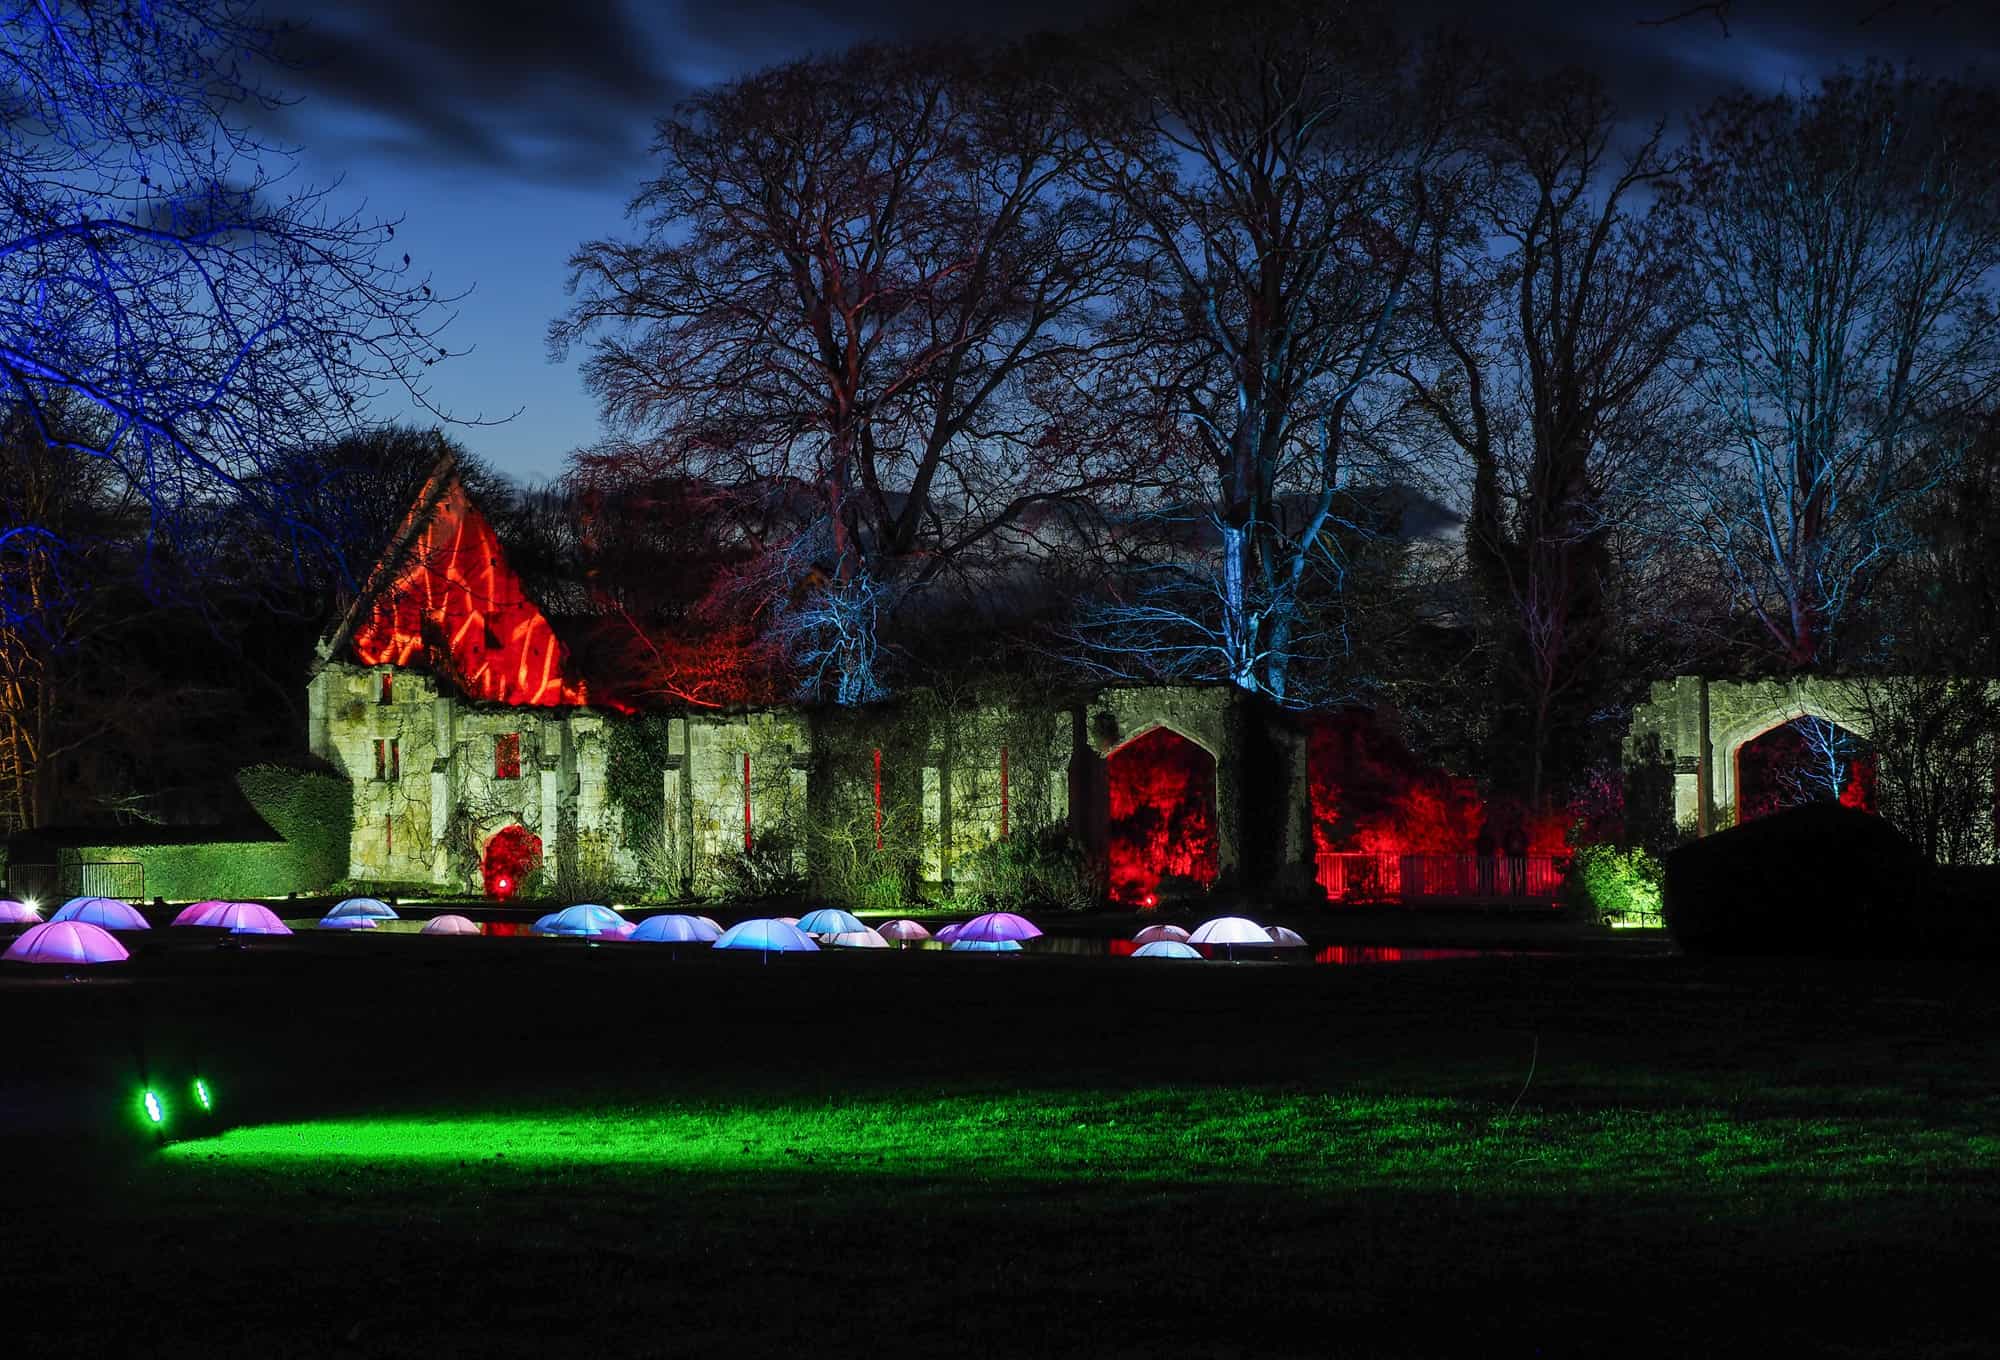 2017 Sudeley Castle Spectacle of Light Photo Gallery 16